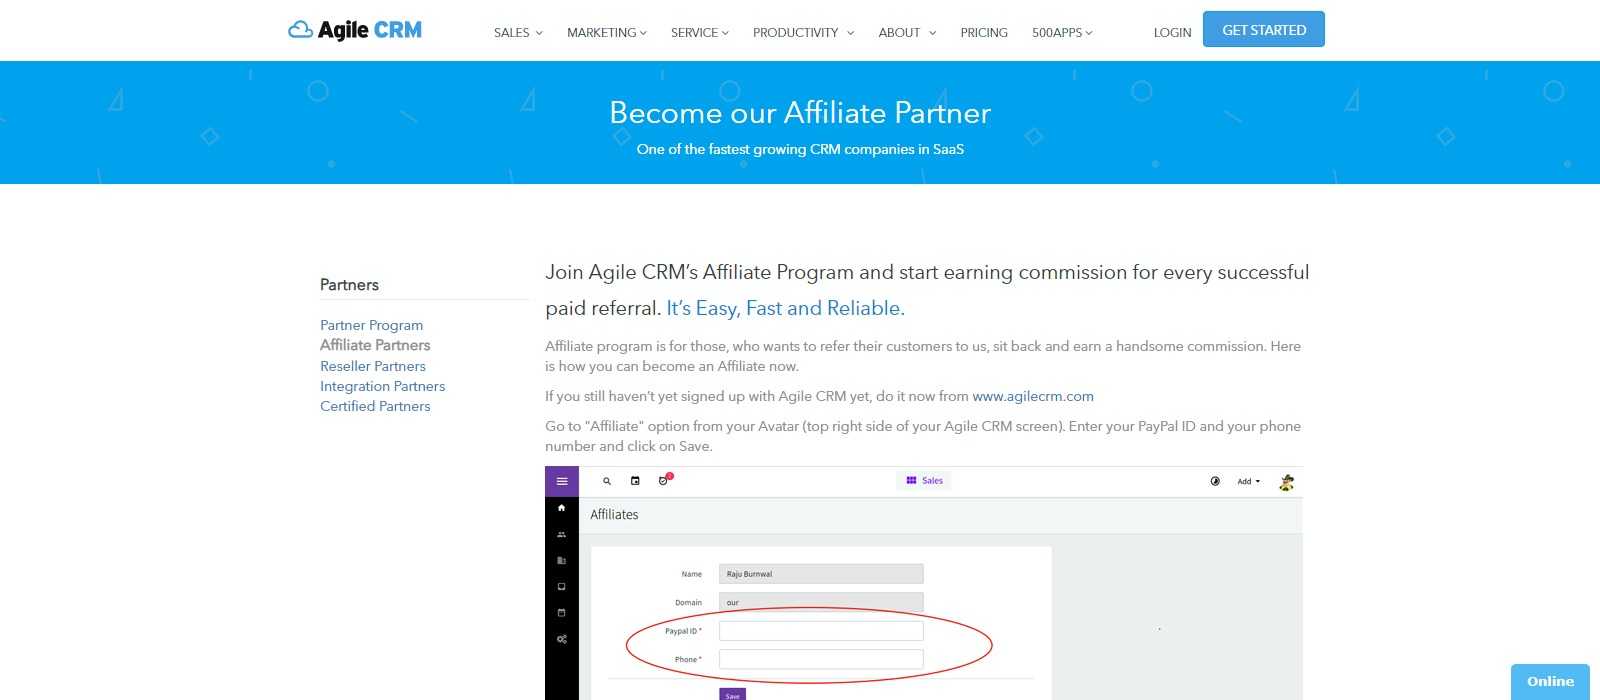 Agile CRM Affiliates Program Review: Earn 10% One-Time Commission